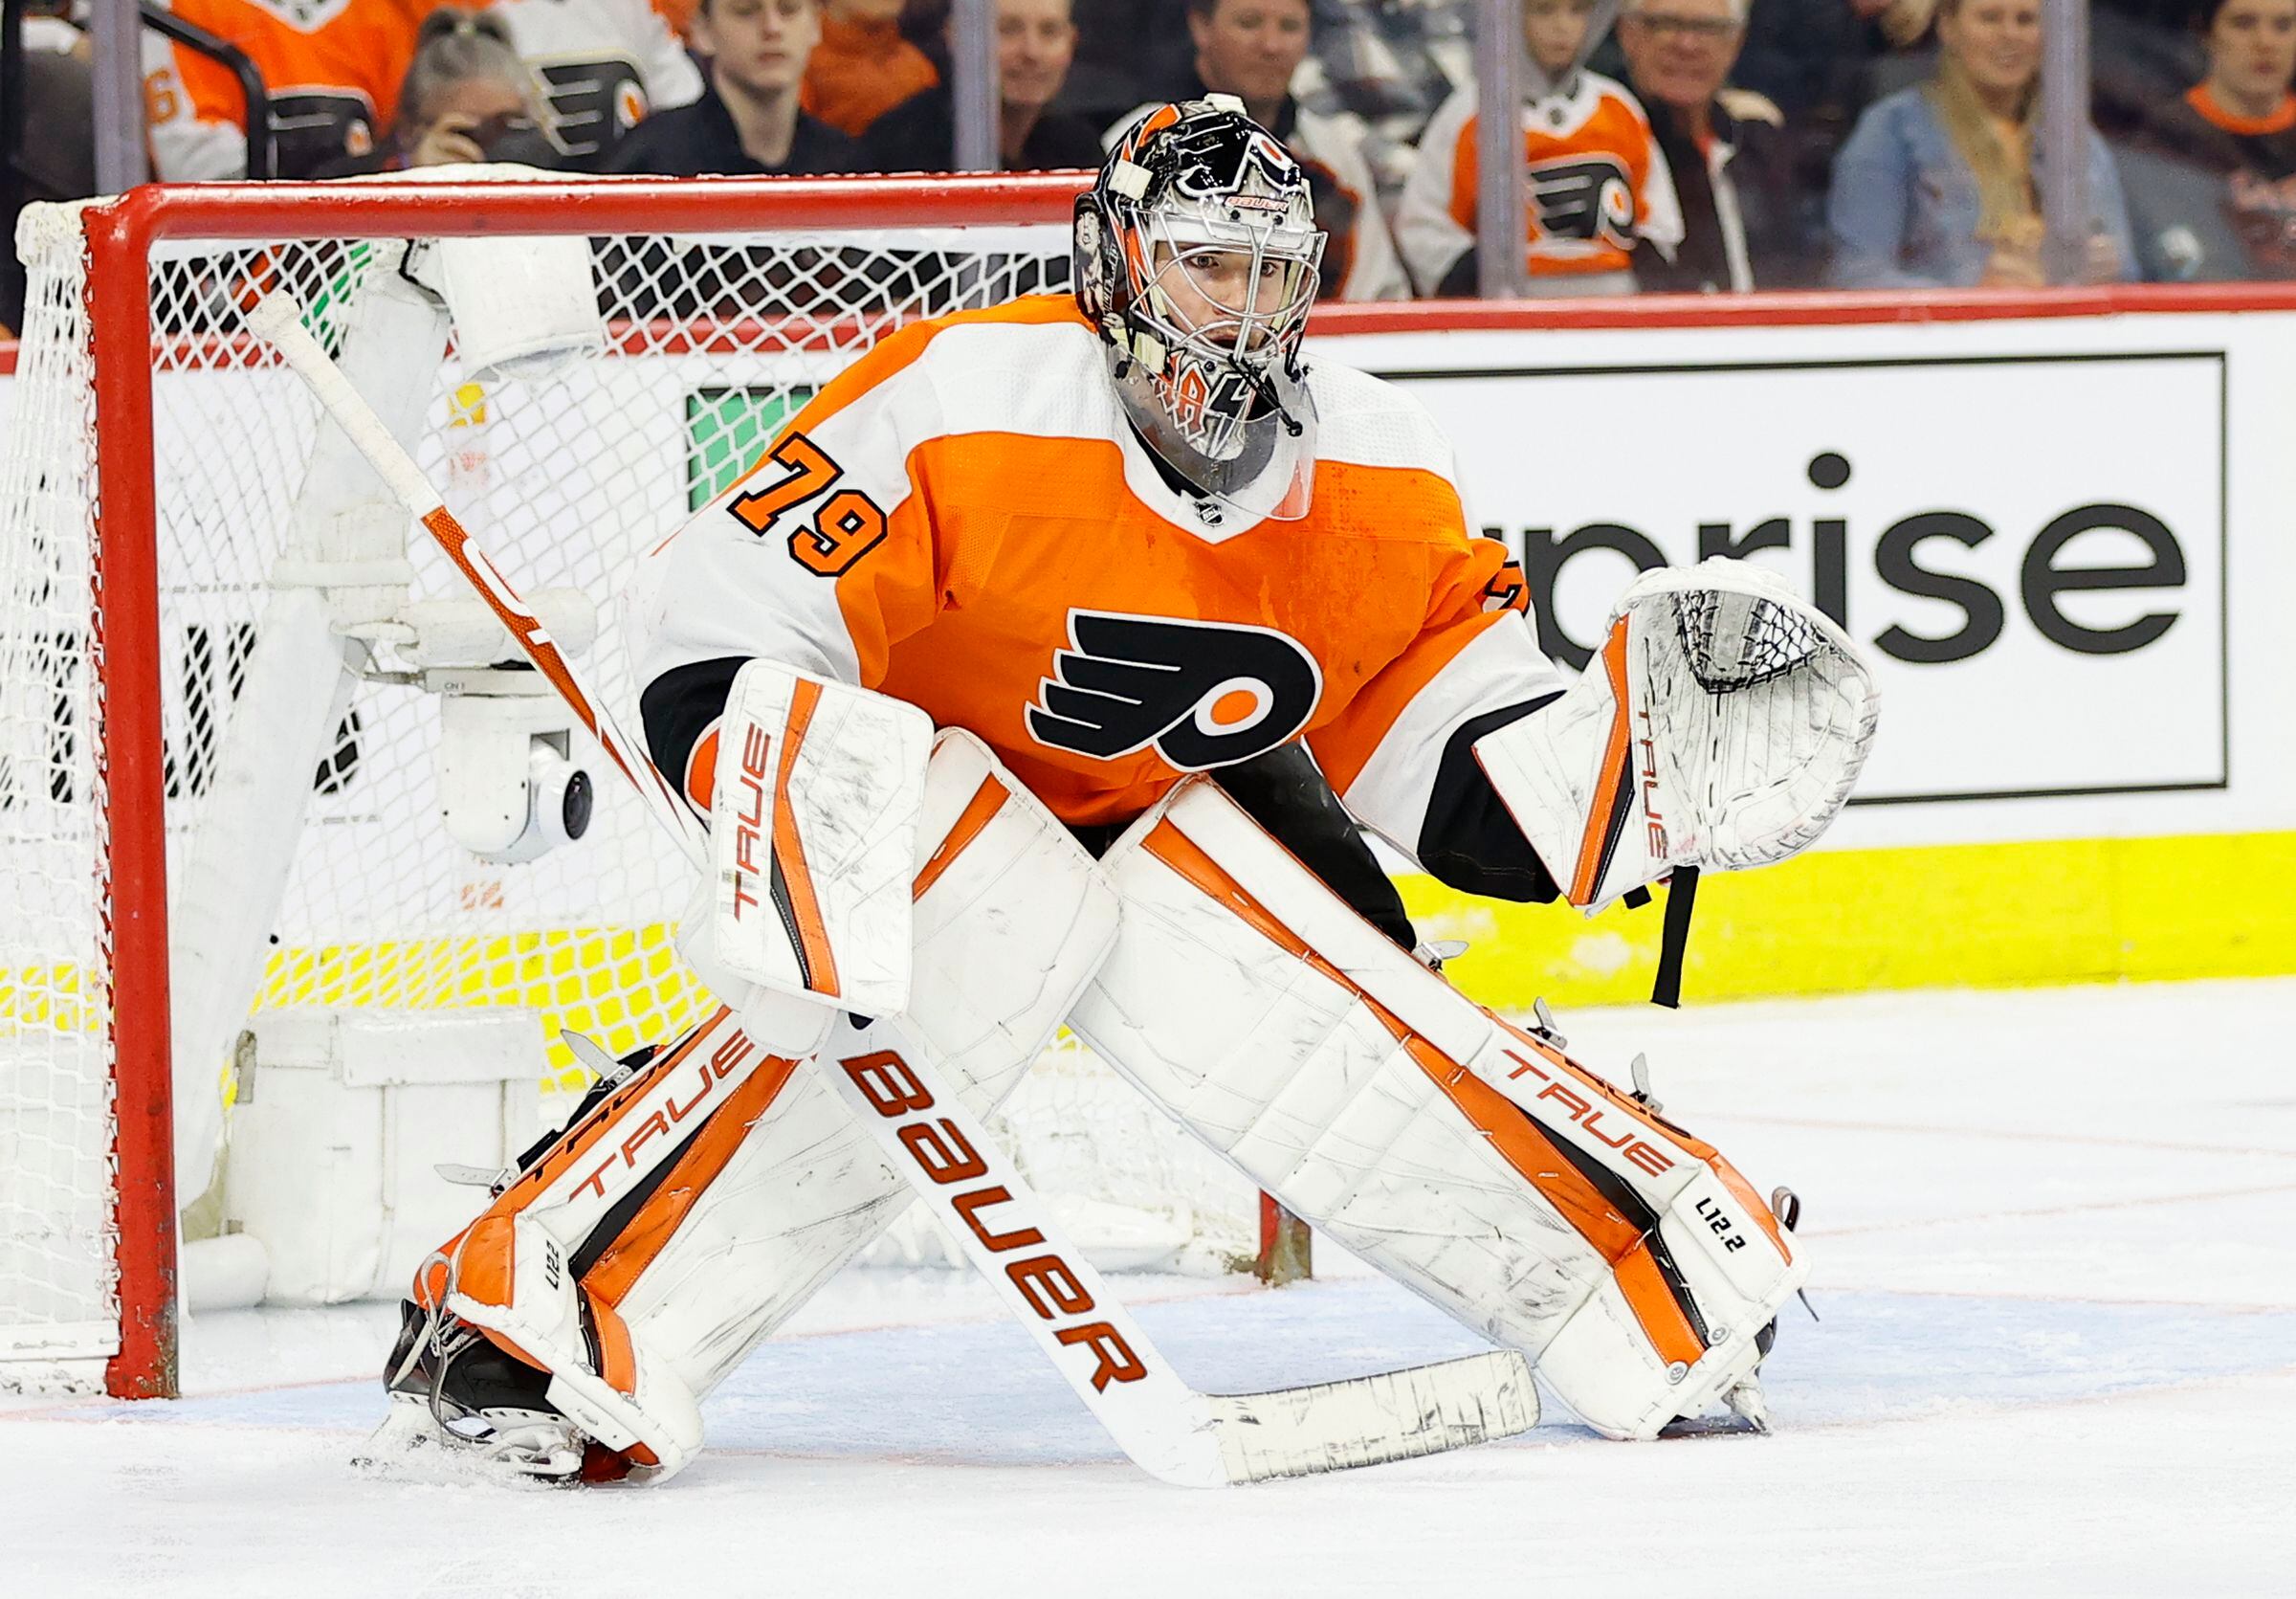 Flyers goalie Carter Hart to be reunited with autistic boy who